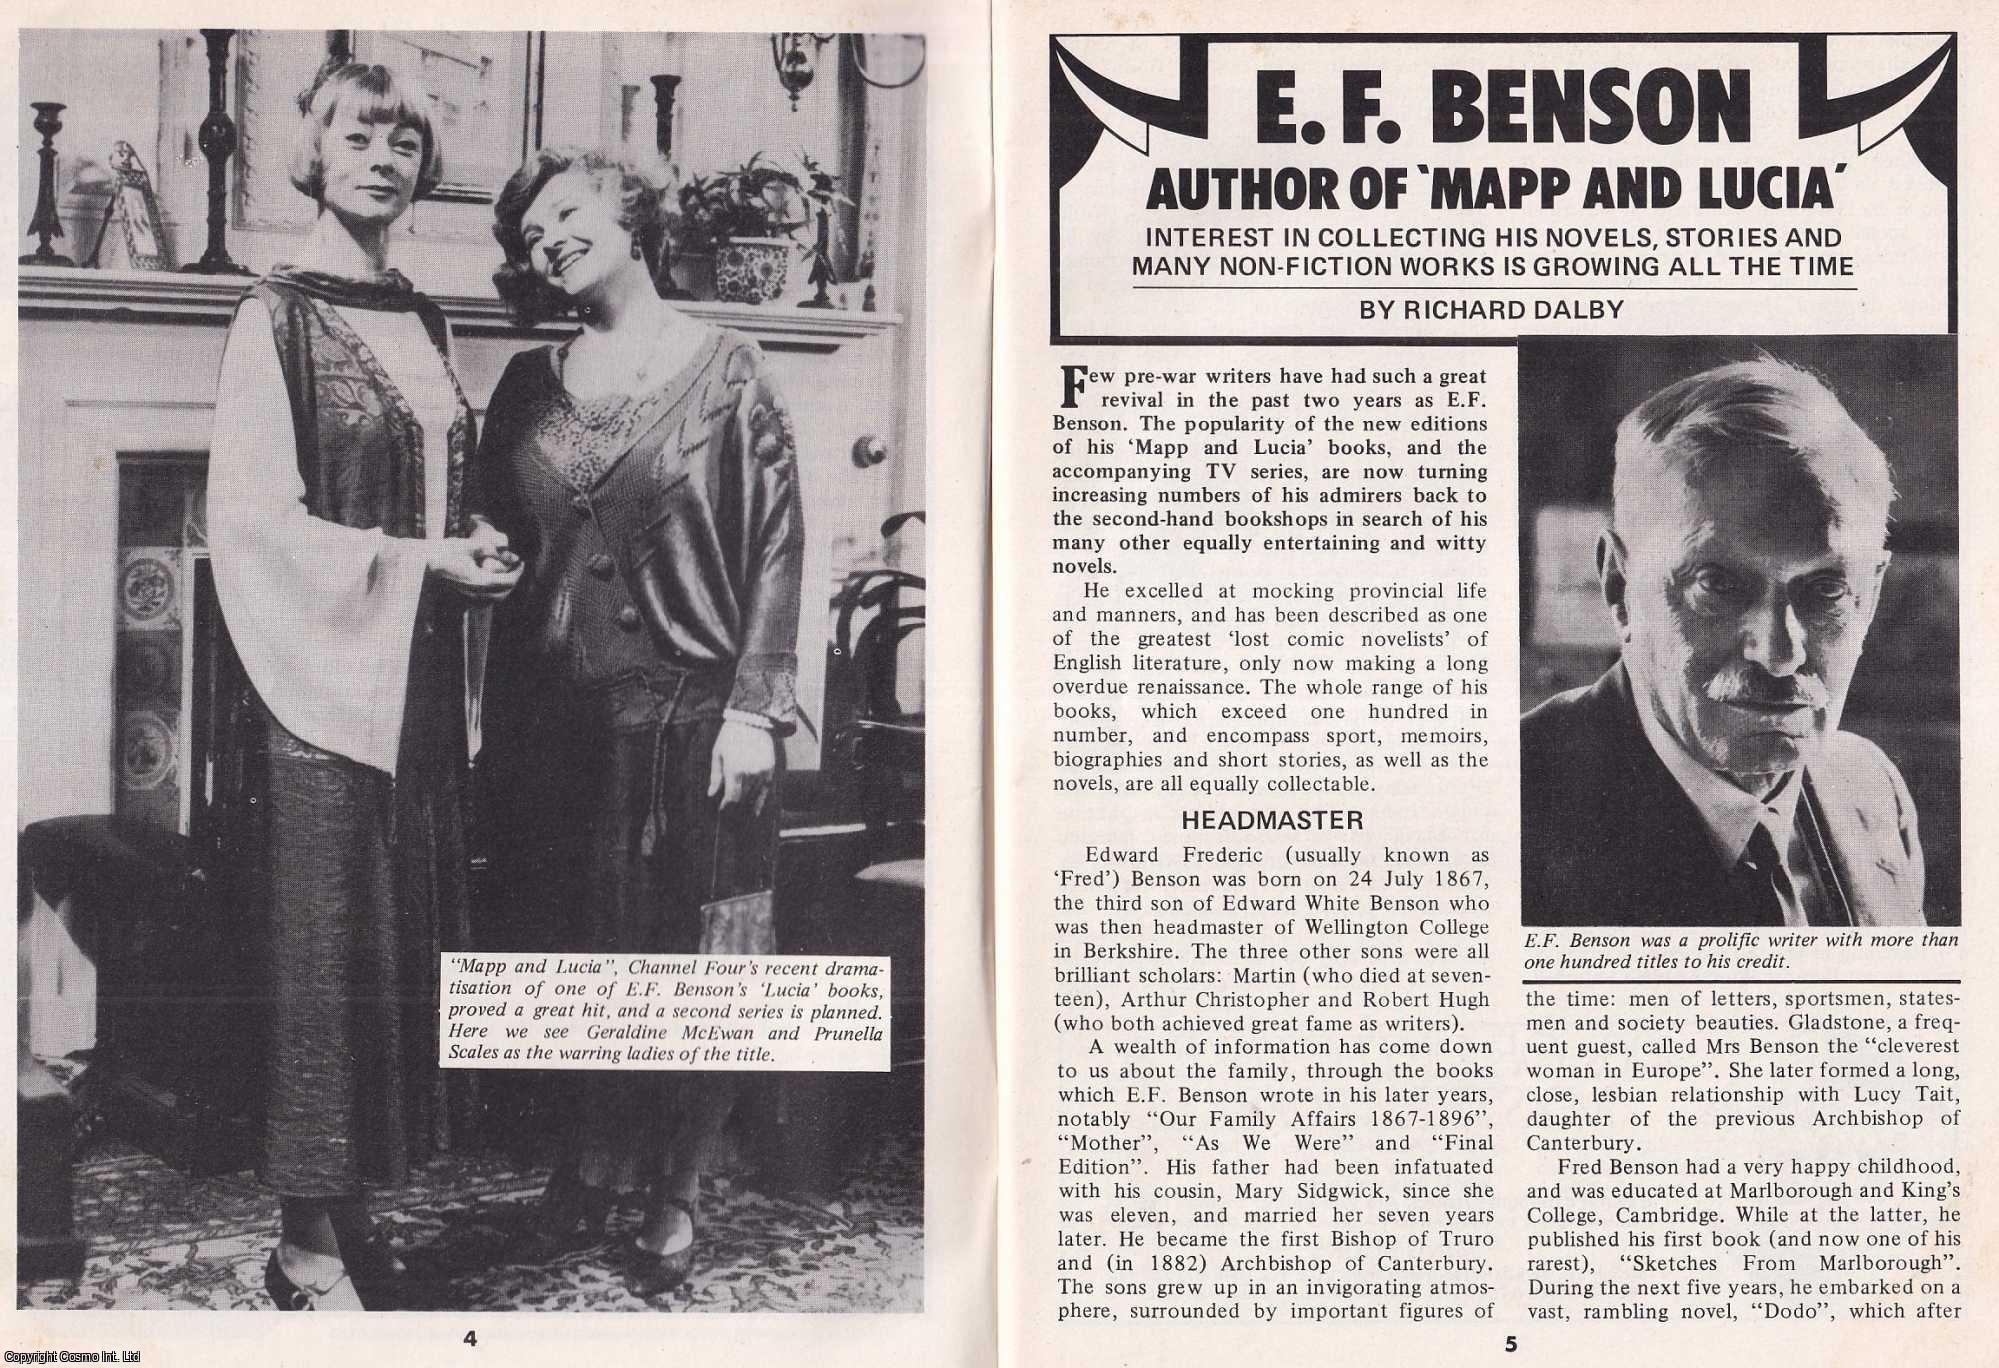 Richard Dalby - E. F. Benson Author of Mapp and Lucia. Collecting His Novels, Stories and Many Non-Fiction Works. This is an original article separated from an issue of The Book & Magazine Collector publication.